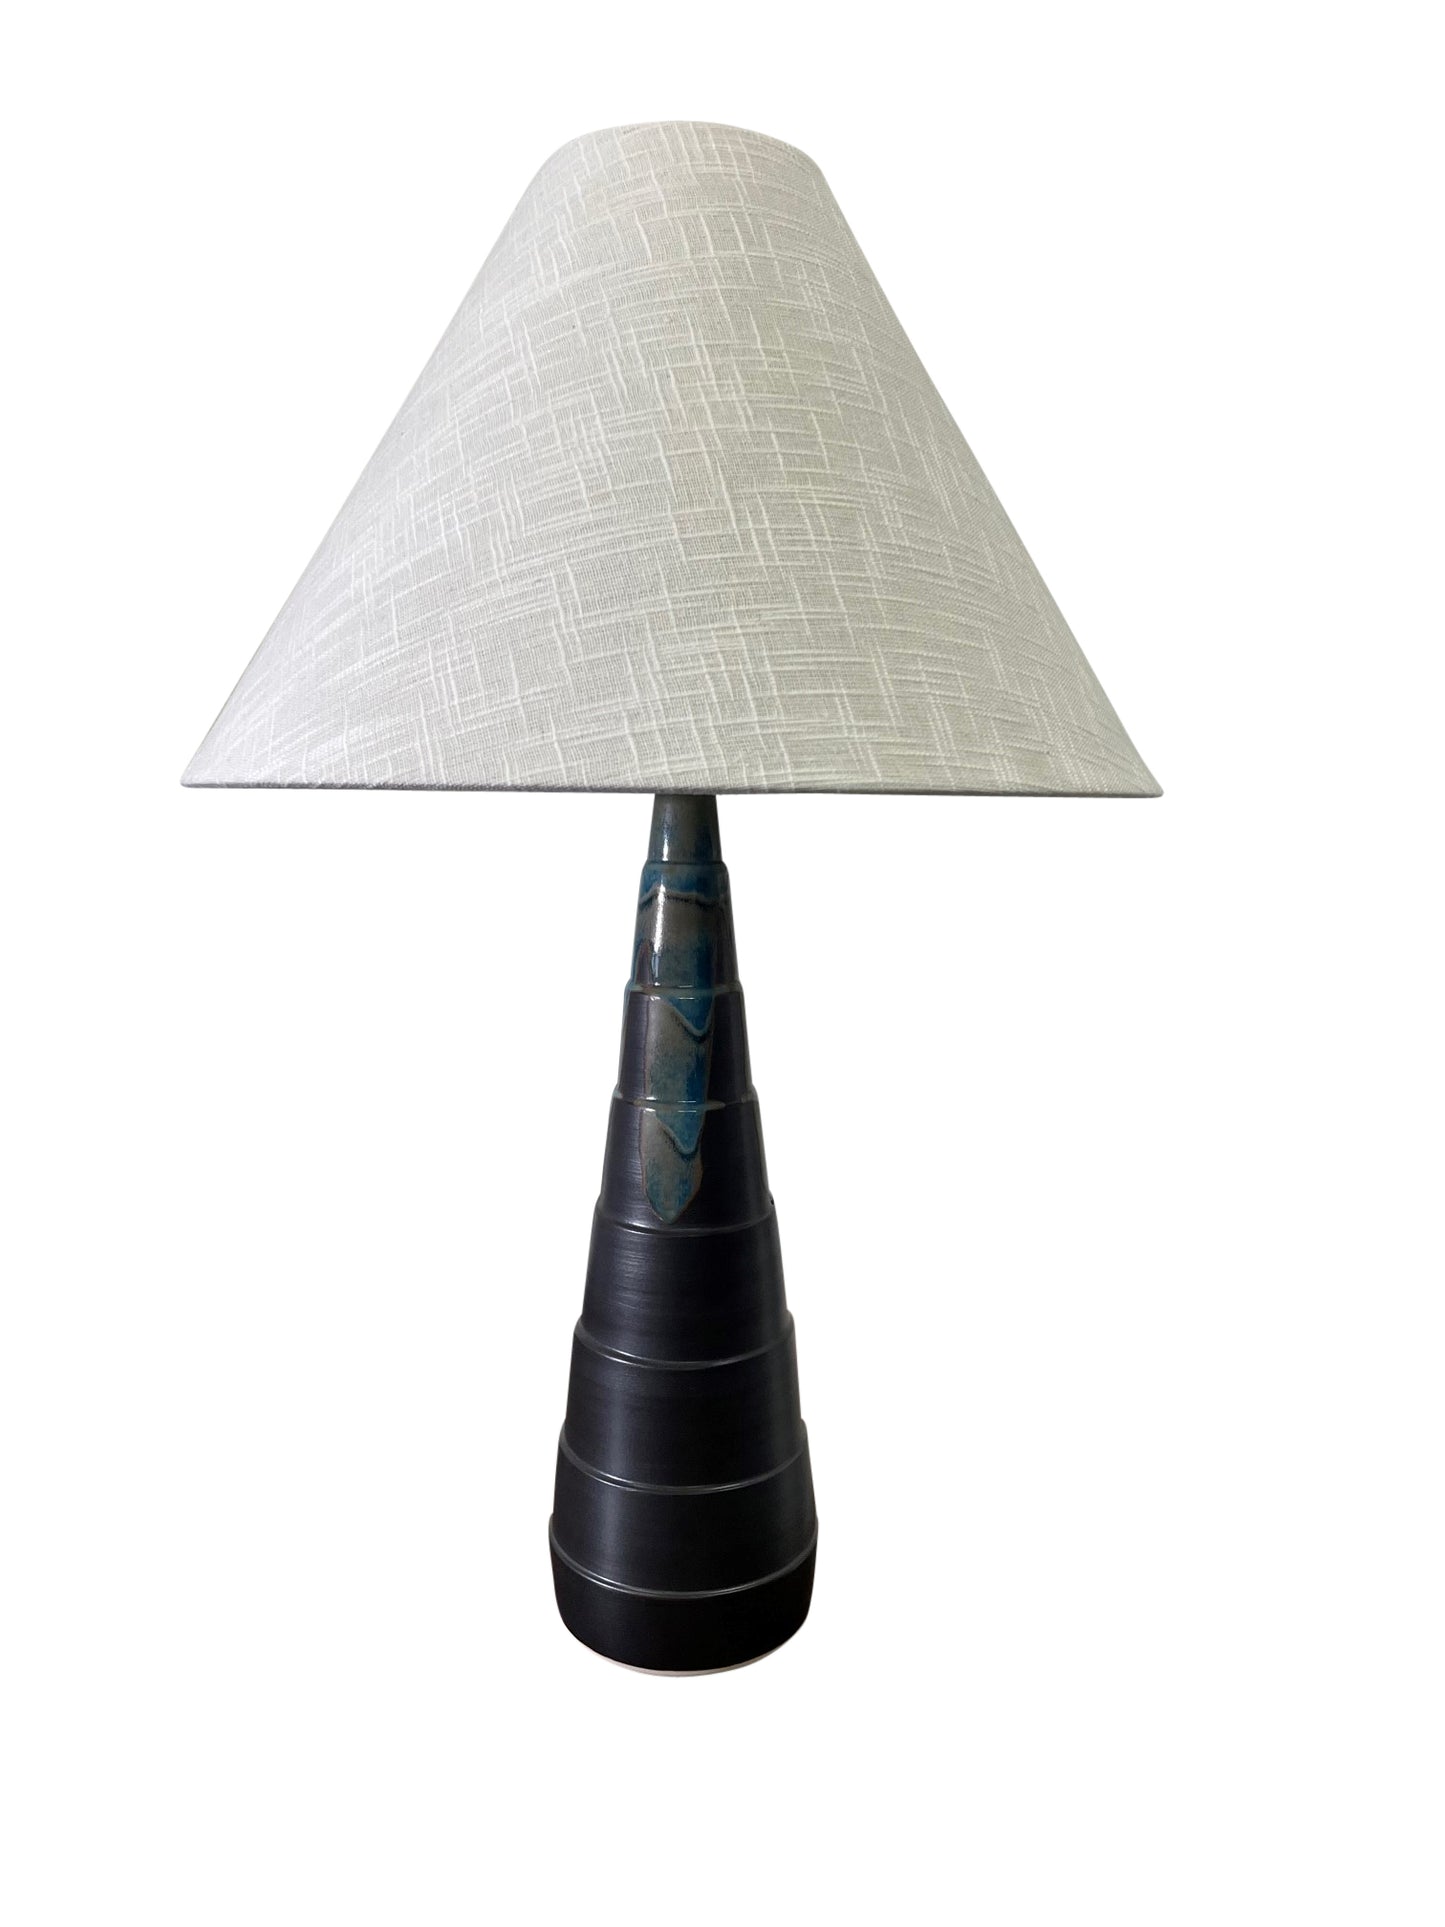 House of Troy Scatchard 26.5" Stoneware Accent Lamp in Kaleidoscope GS825-KS